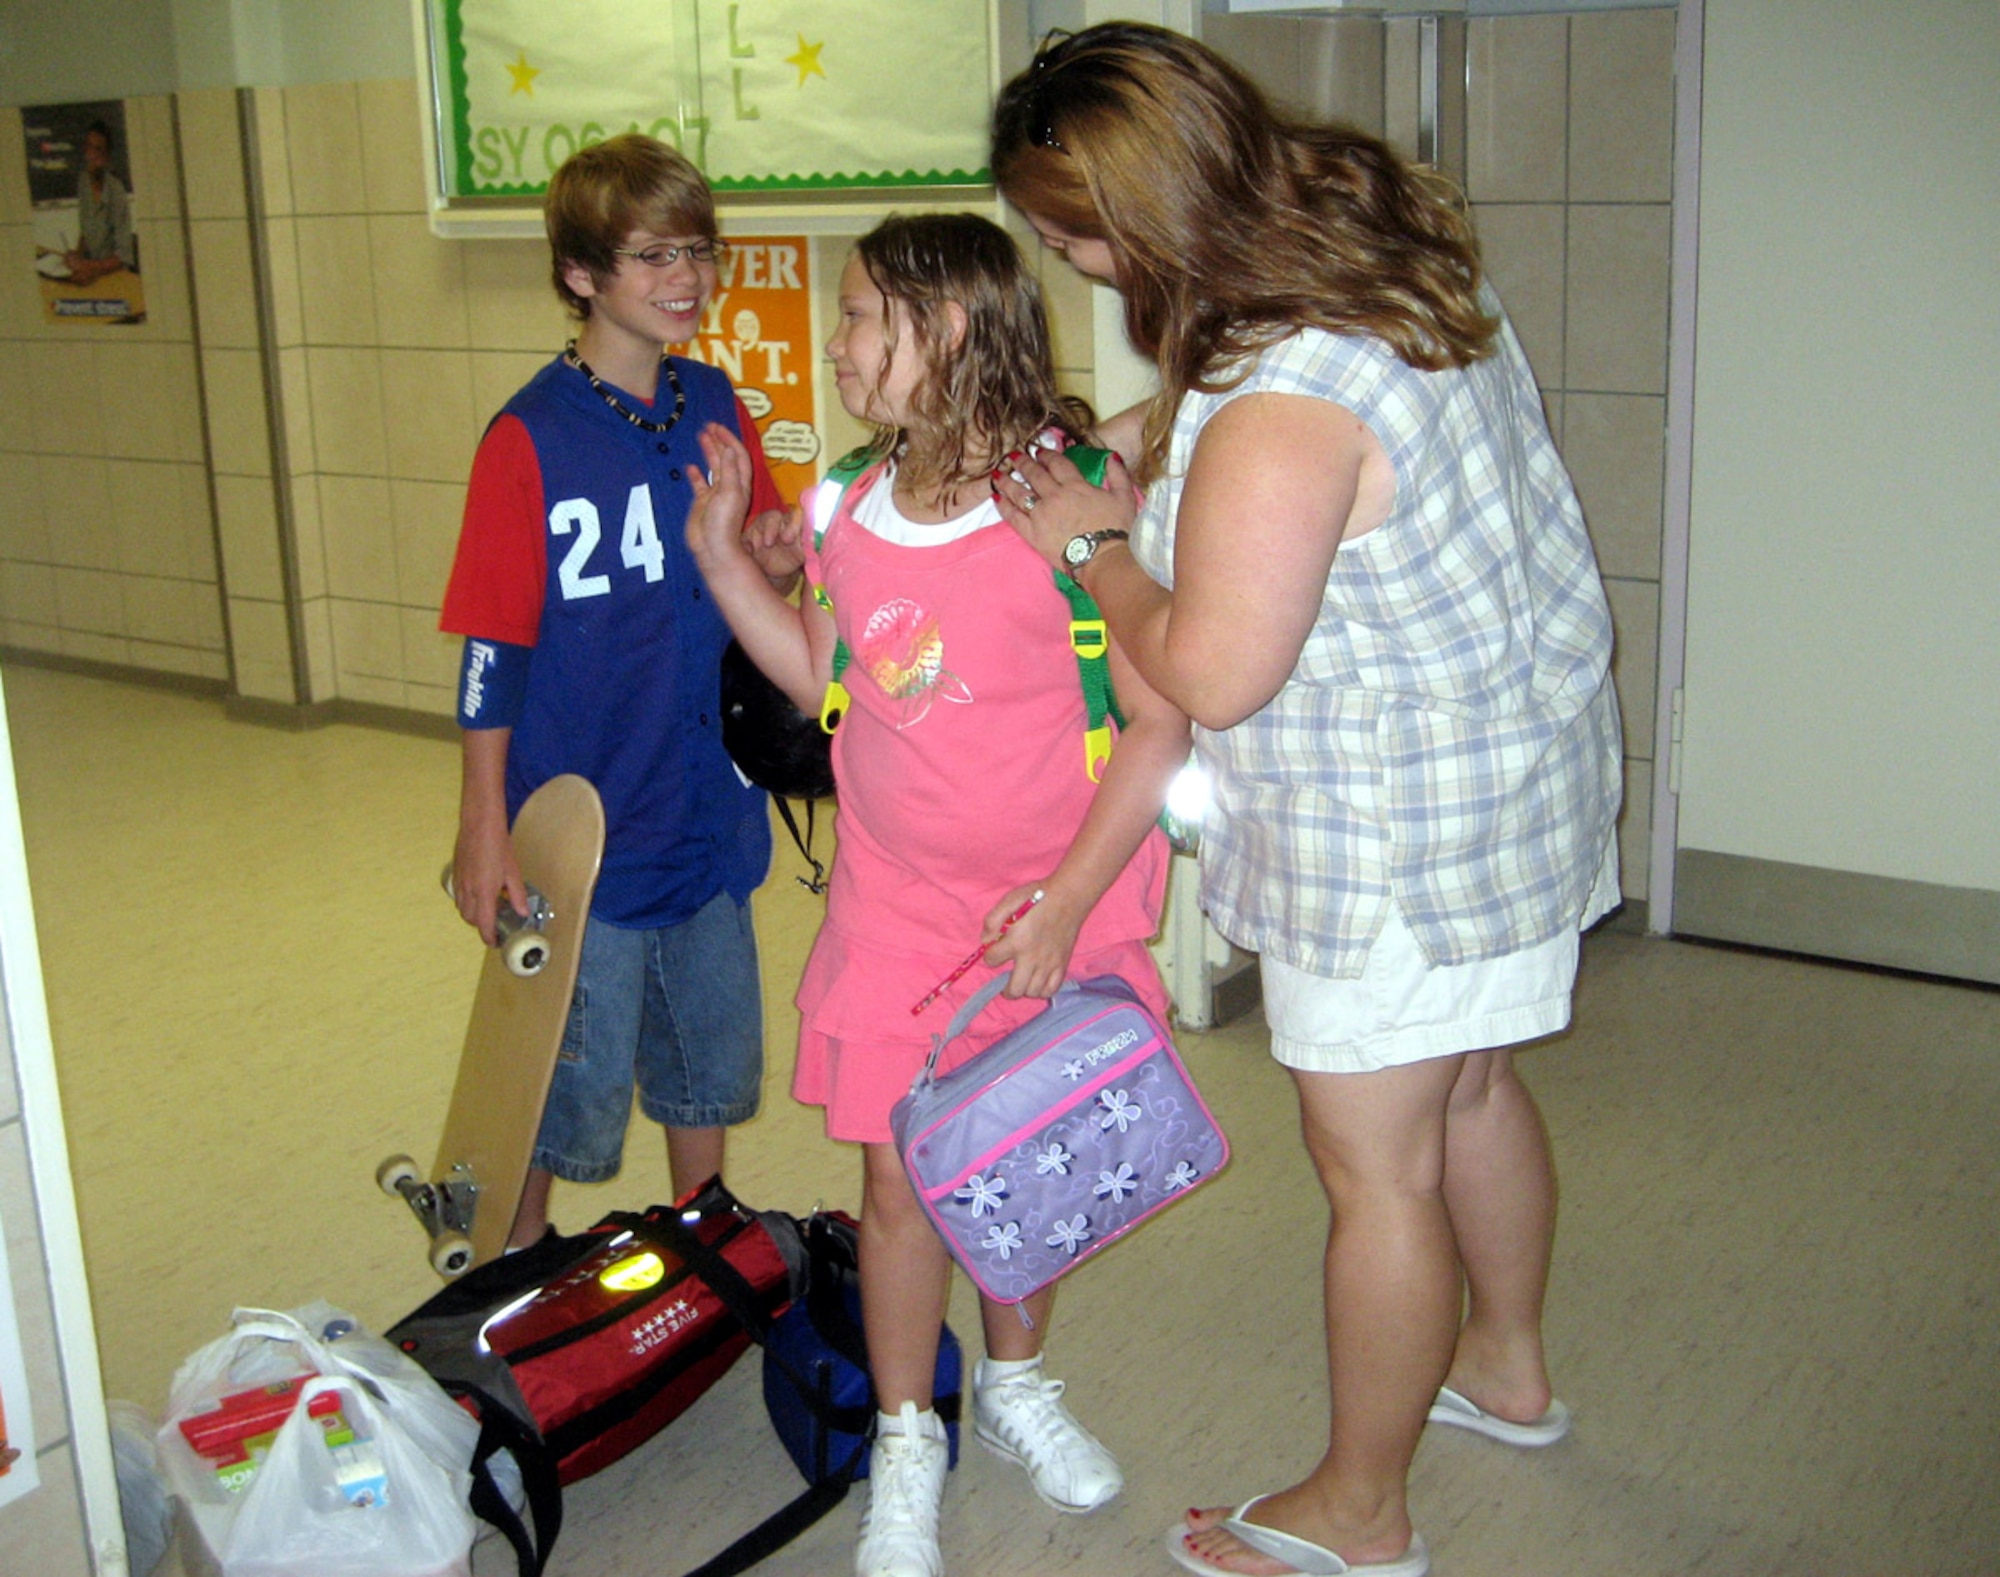 SPANGDAHLEM AIR BASE, Germany – Tammy Vaughan says goodbye to her children, Erin, 9, and Chase, 11, on the first day of school at Bitburg Middle School Aug. 27. Chase attends BMS and Erin attends Bitburg Elementary School. Their father is Tech. Sgt. Rickey Vaughan from the 52nd Communications Squadron. (U.S. Air Force photo/Staff. Sgt. Andrea Knudson)